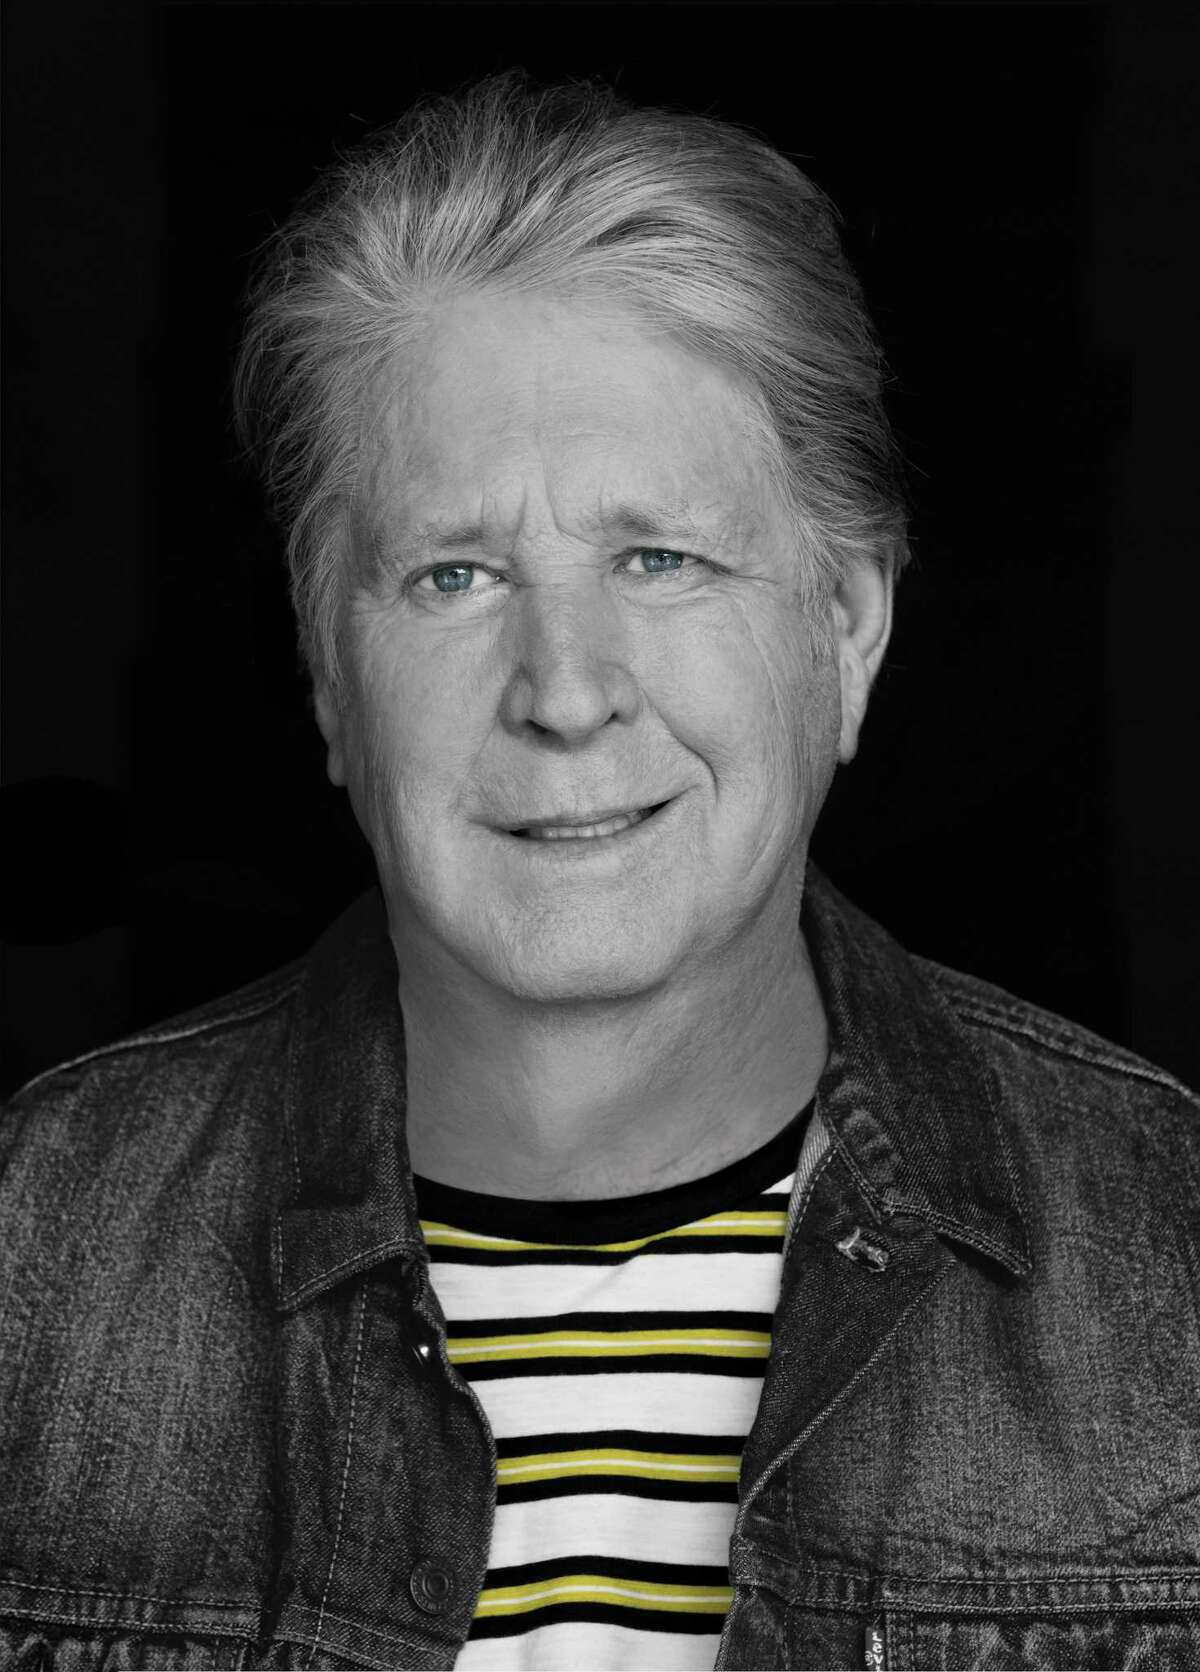 “Brian Wilson Presents The Christmas Album Live” comes to the Toyota Oakdale Theatre in Wallingford on Dec. 8.